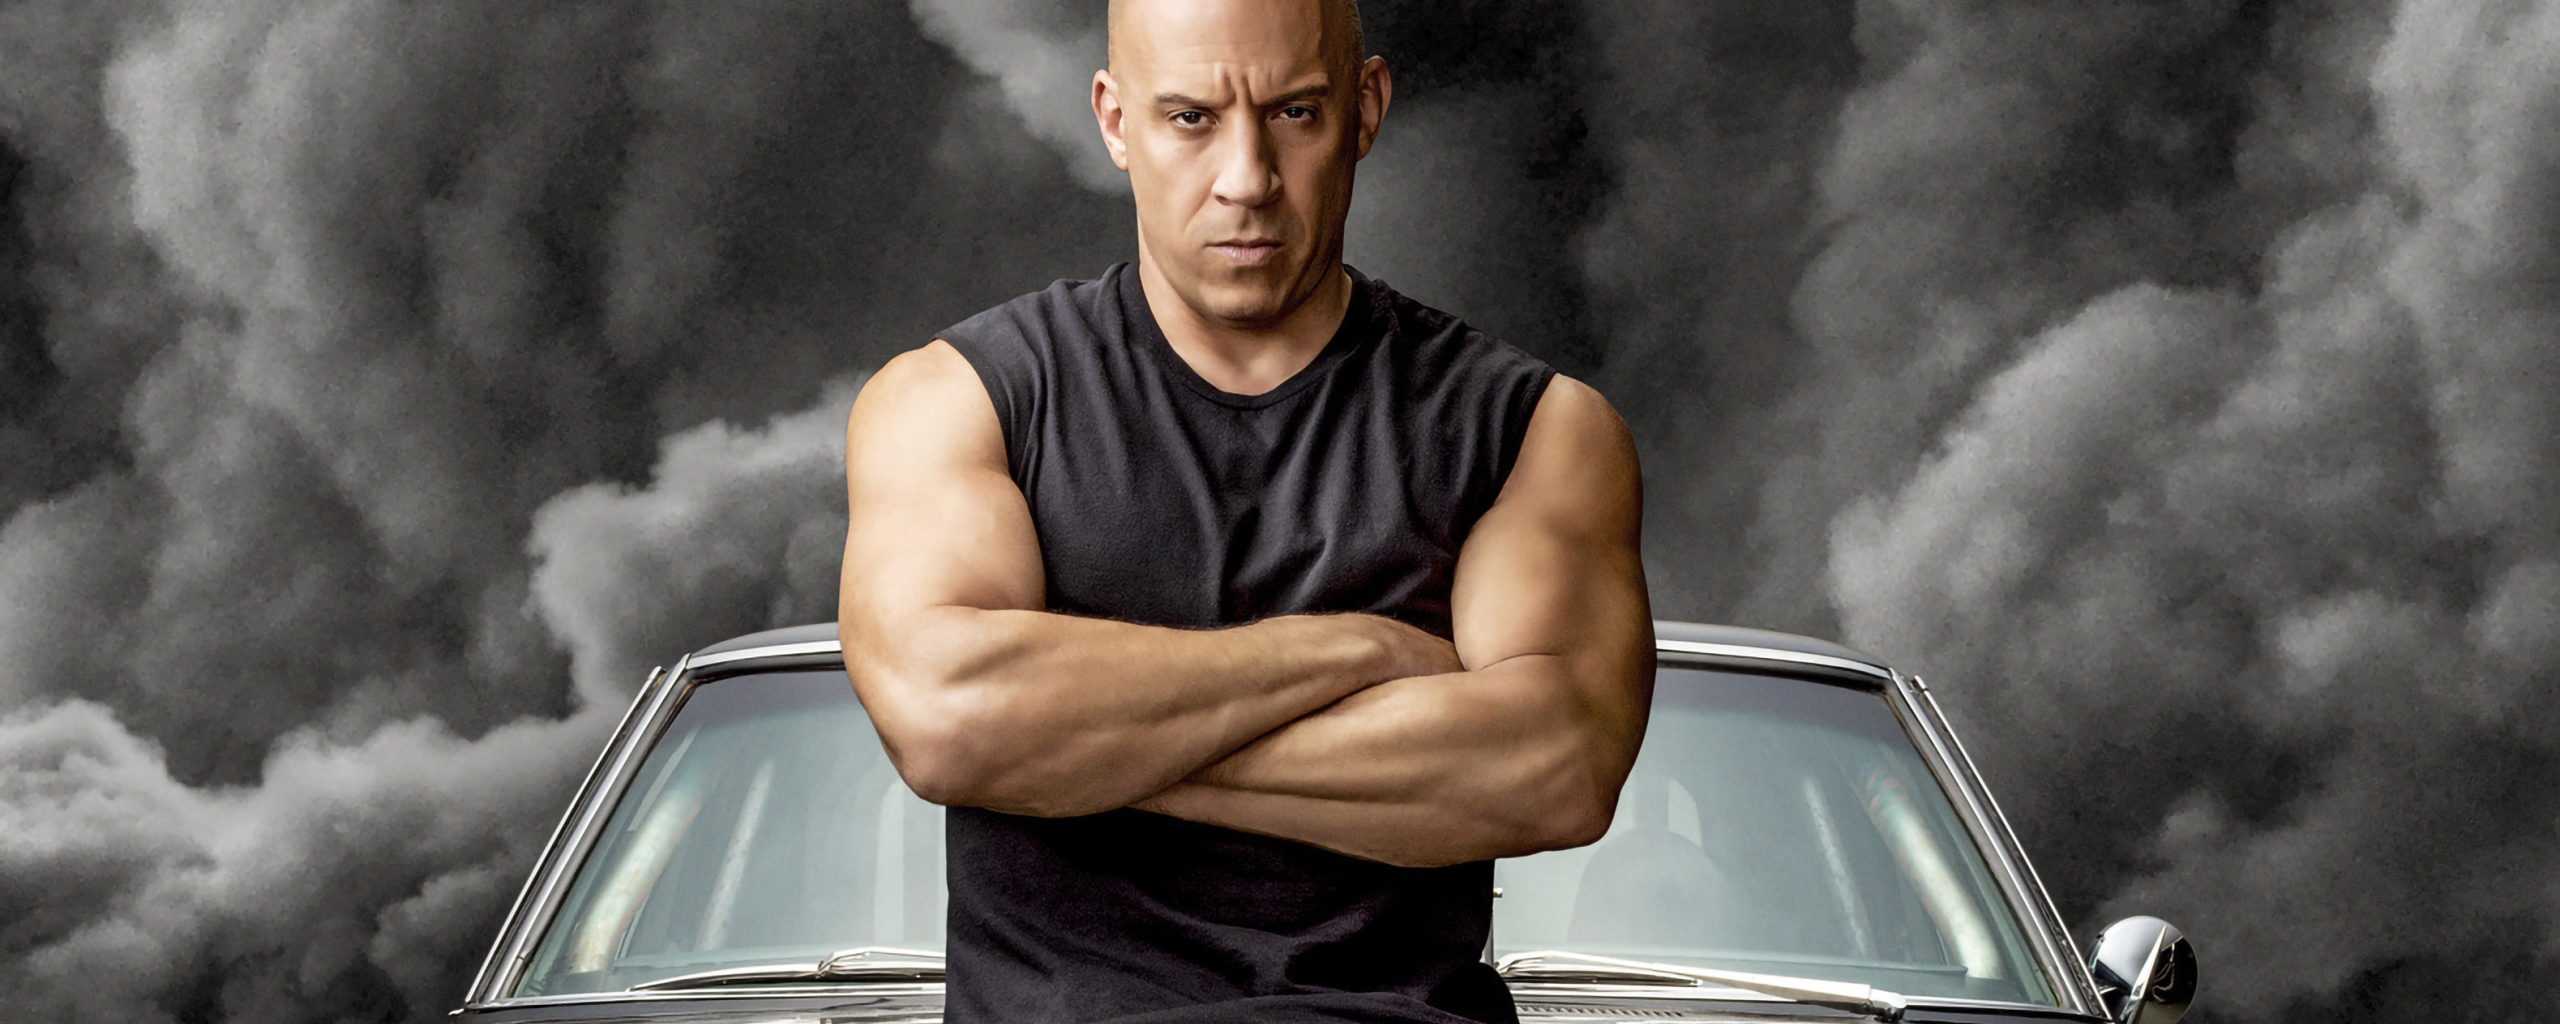 2560x1024 Vin Diesel in Fast And Furious 9 2560x1024 ...